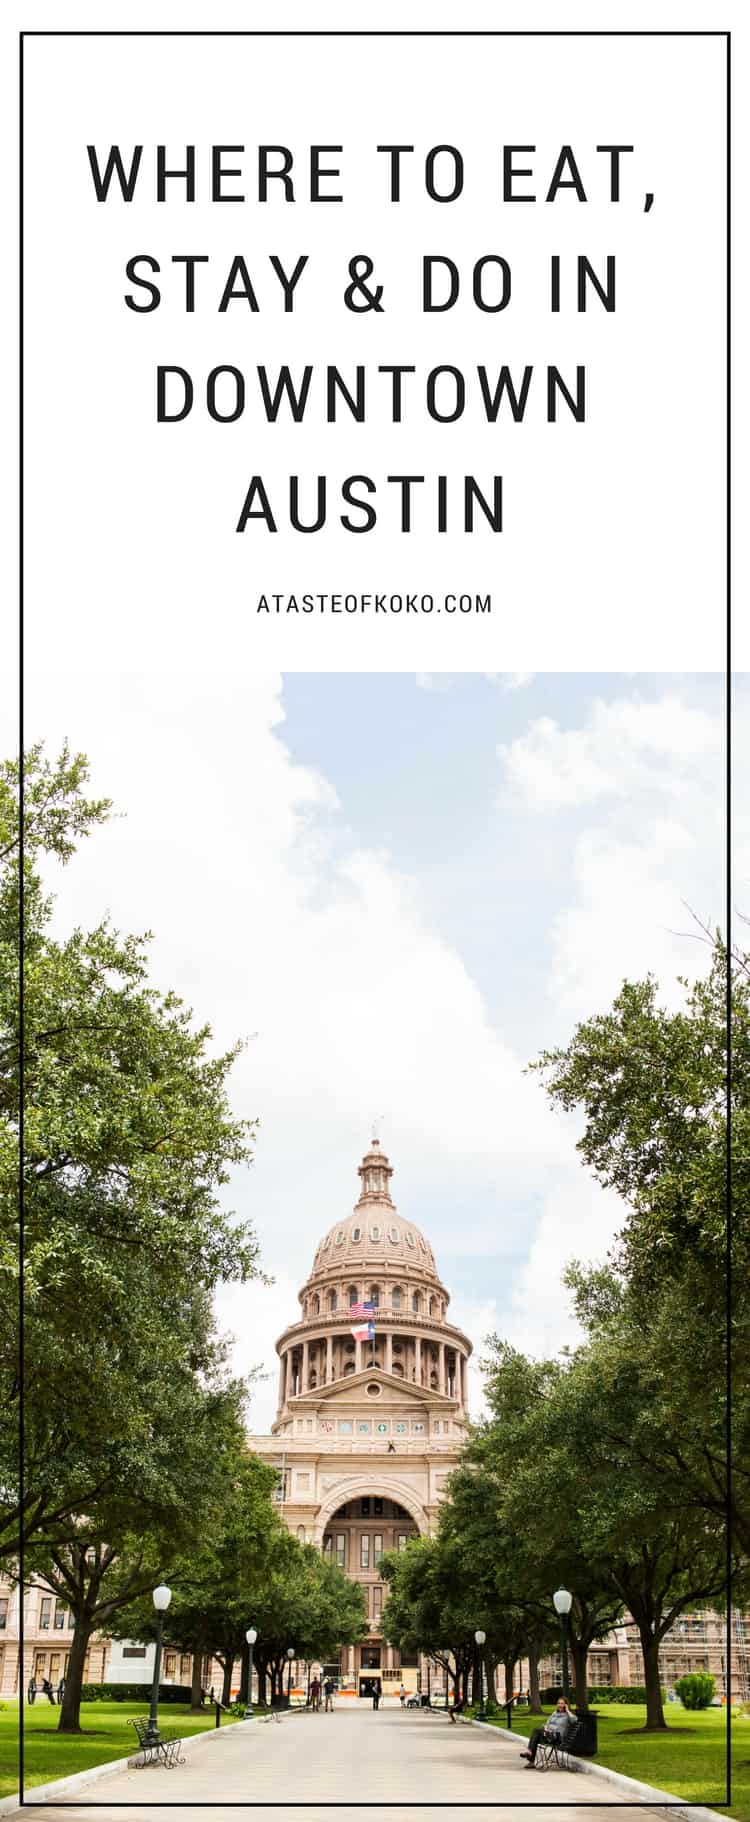 Where To Eat, Stay & Do In Downtown Austin